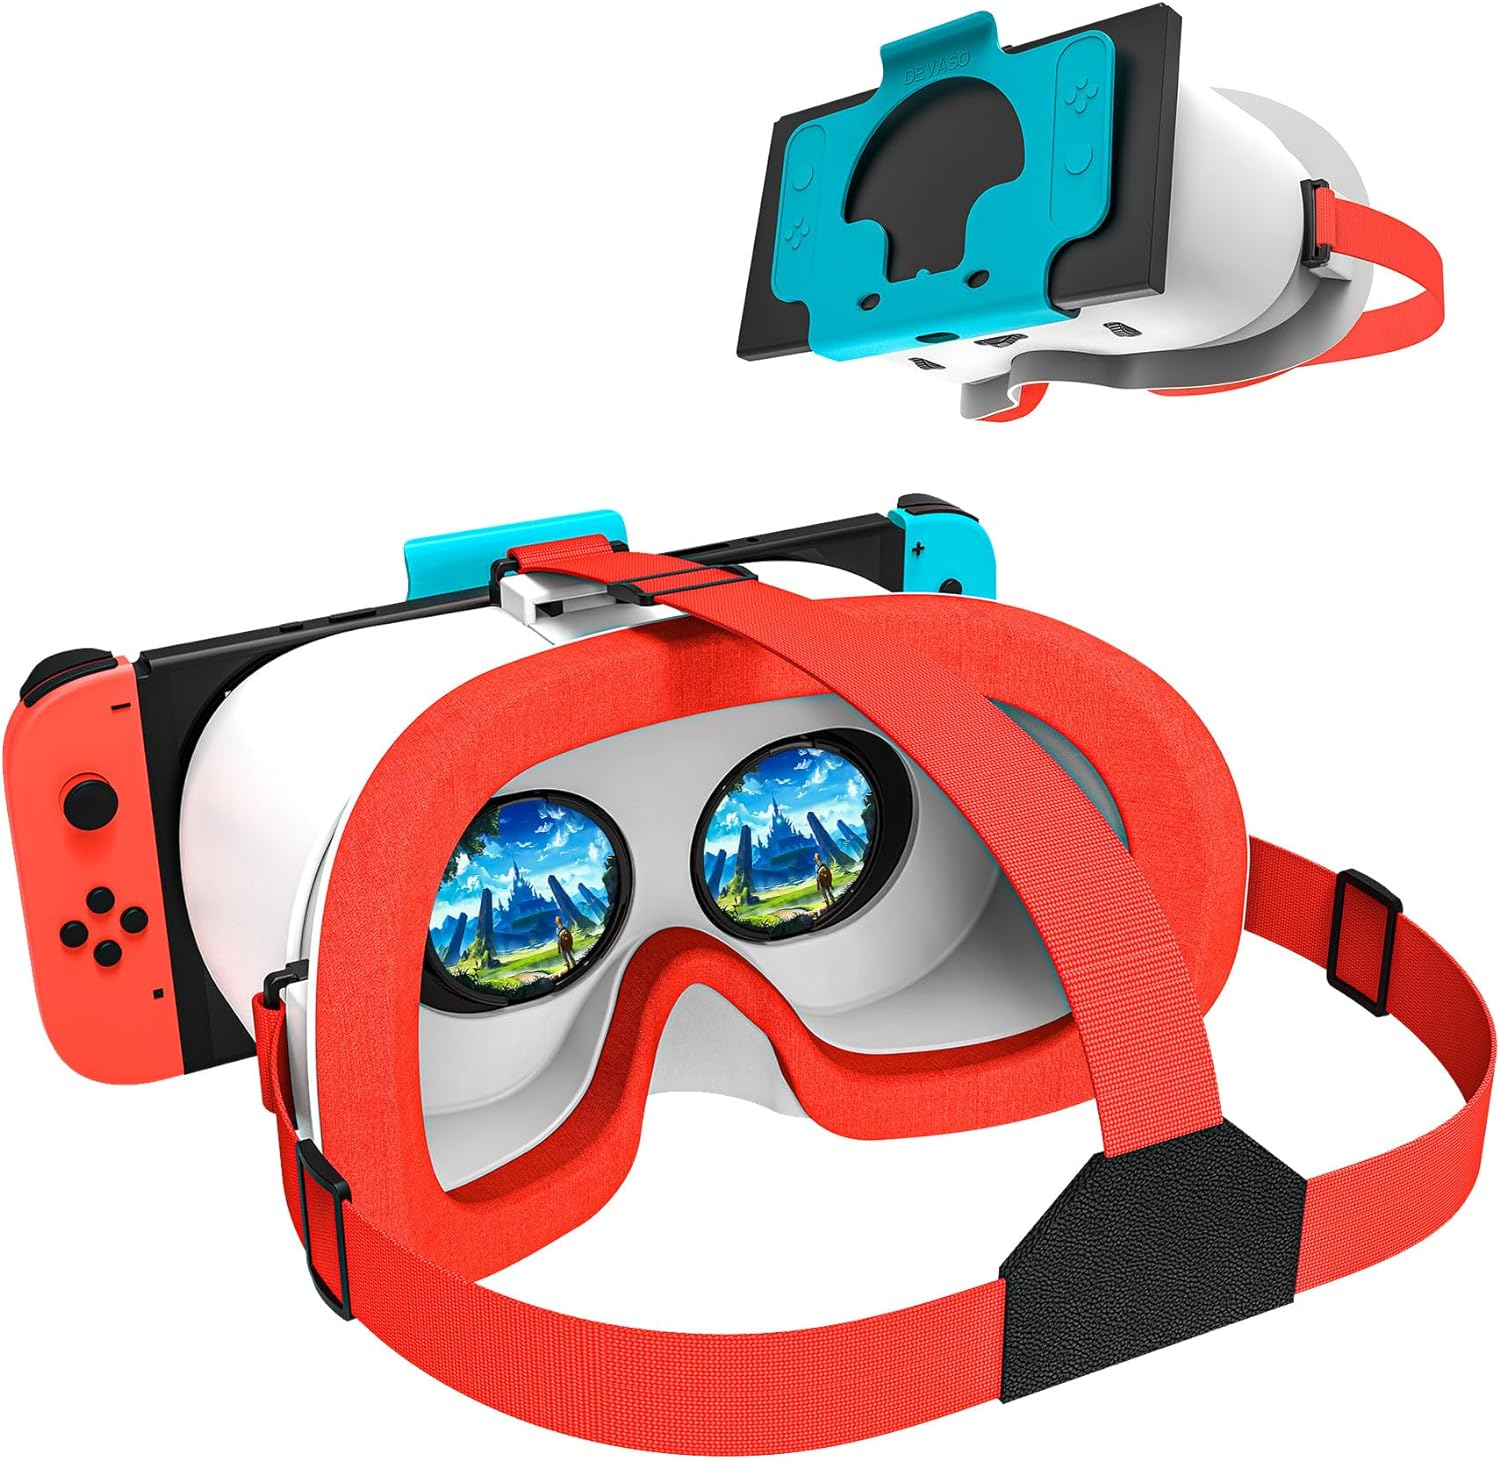 MVPTGRS Upgraded VR Headset for Nintendo Switch/Nintendo Switch OLED, Nintendo Switch 3D VR Virtual Reality Glasses, Switch VR Labo Goggles Headset for Nintendo Switch Accessories